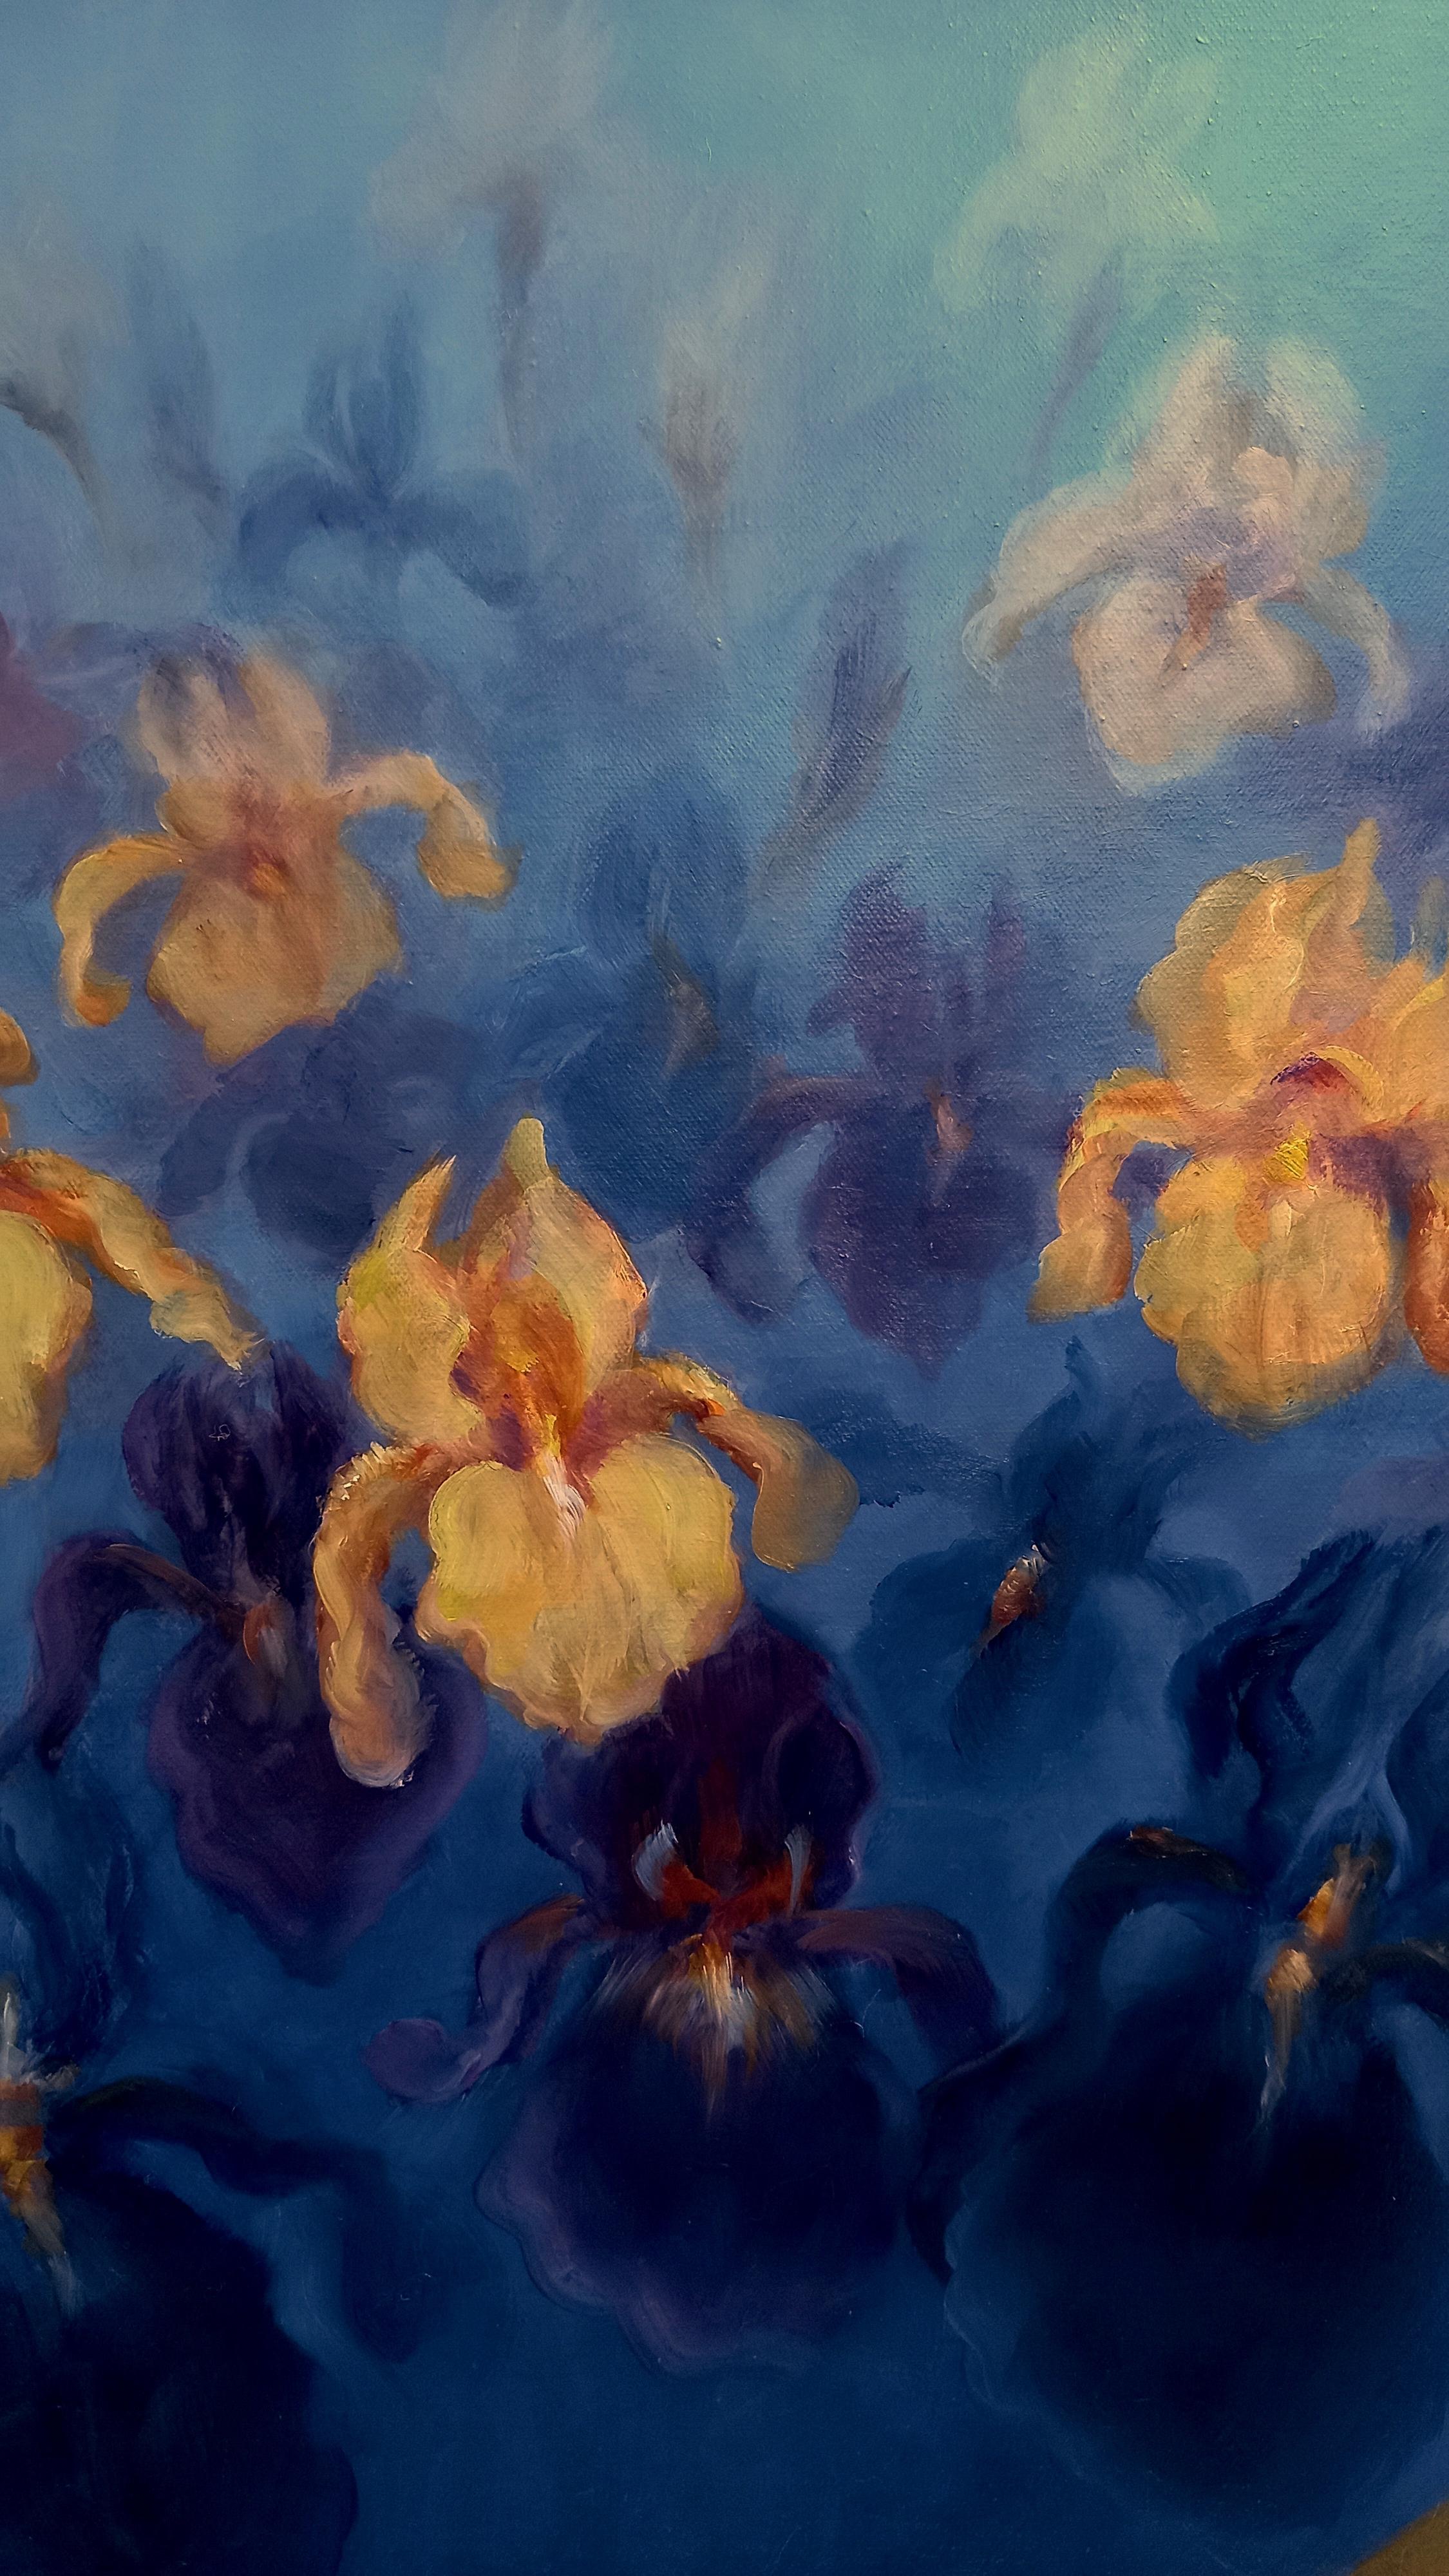 Irises
24.0 x 24.0 x 1.5, 2.5 lbs 
Oil Paint
Hand signed by artist 

Description:
An original oil painting by Lee Campbell. This contemporary painting depicts irises. The flowers appear almost ghostly as they fade into the back of the